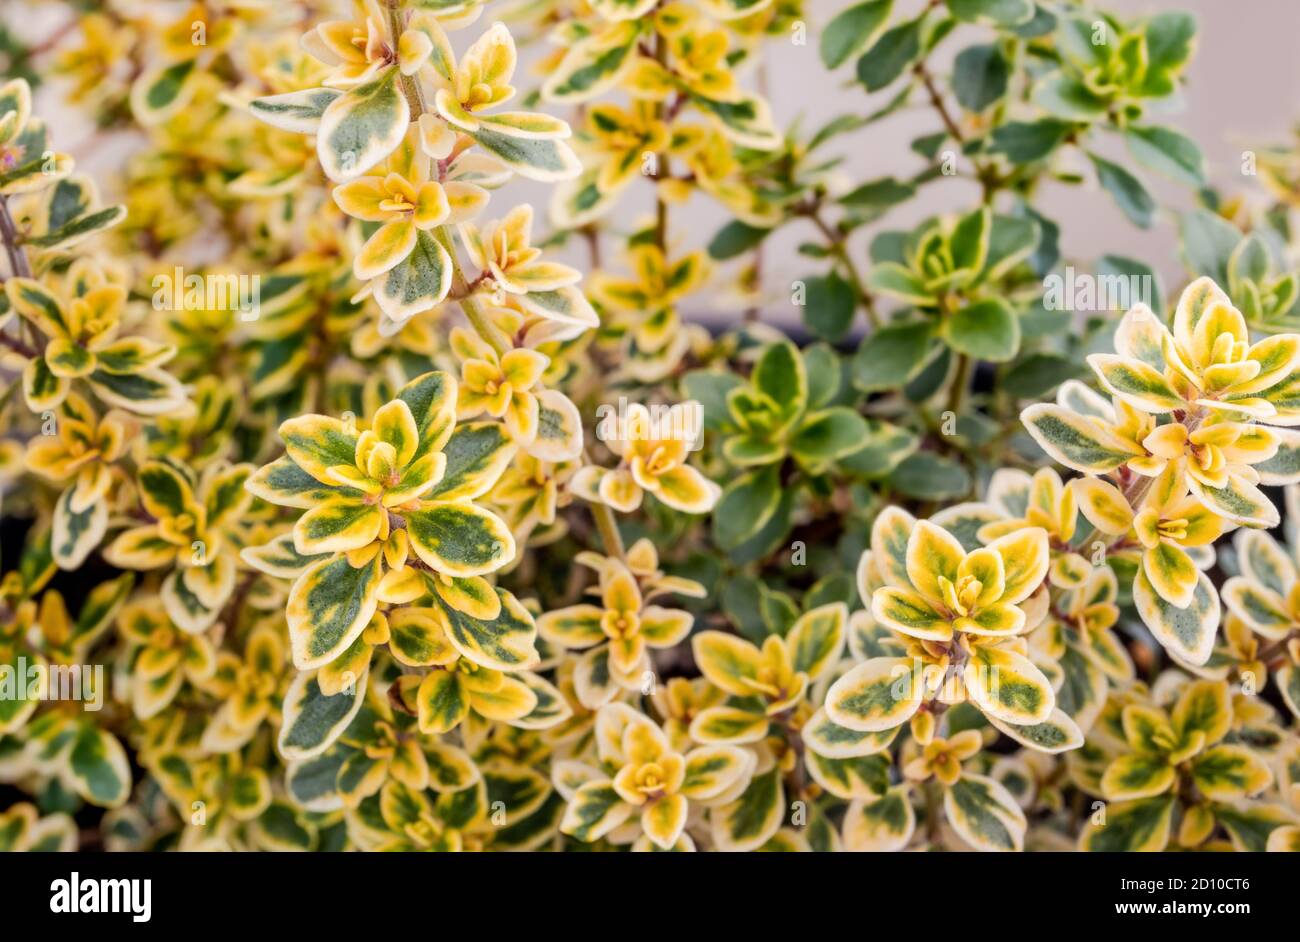 Lemon thyme or citrus thyme, closeup. A shrub-like evergreen herb with tiny yellow green leaves. Aromatic citrus-scented herb used in many culinary re Stock Photo